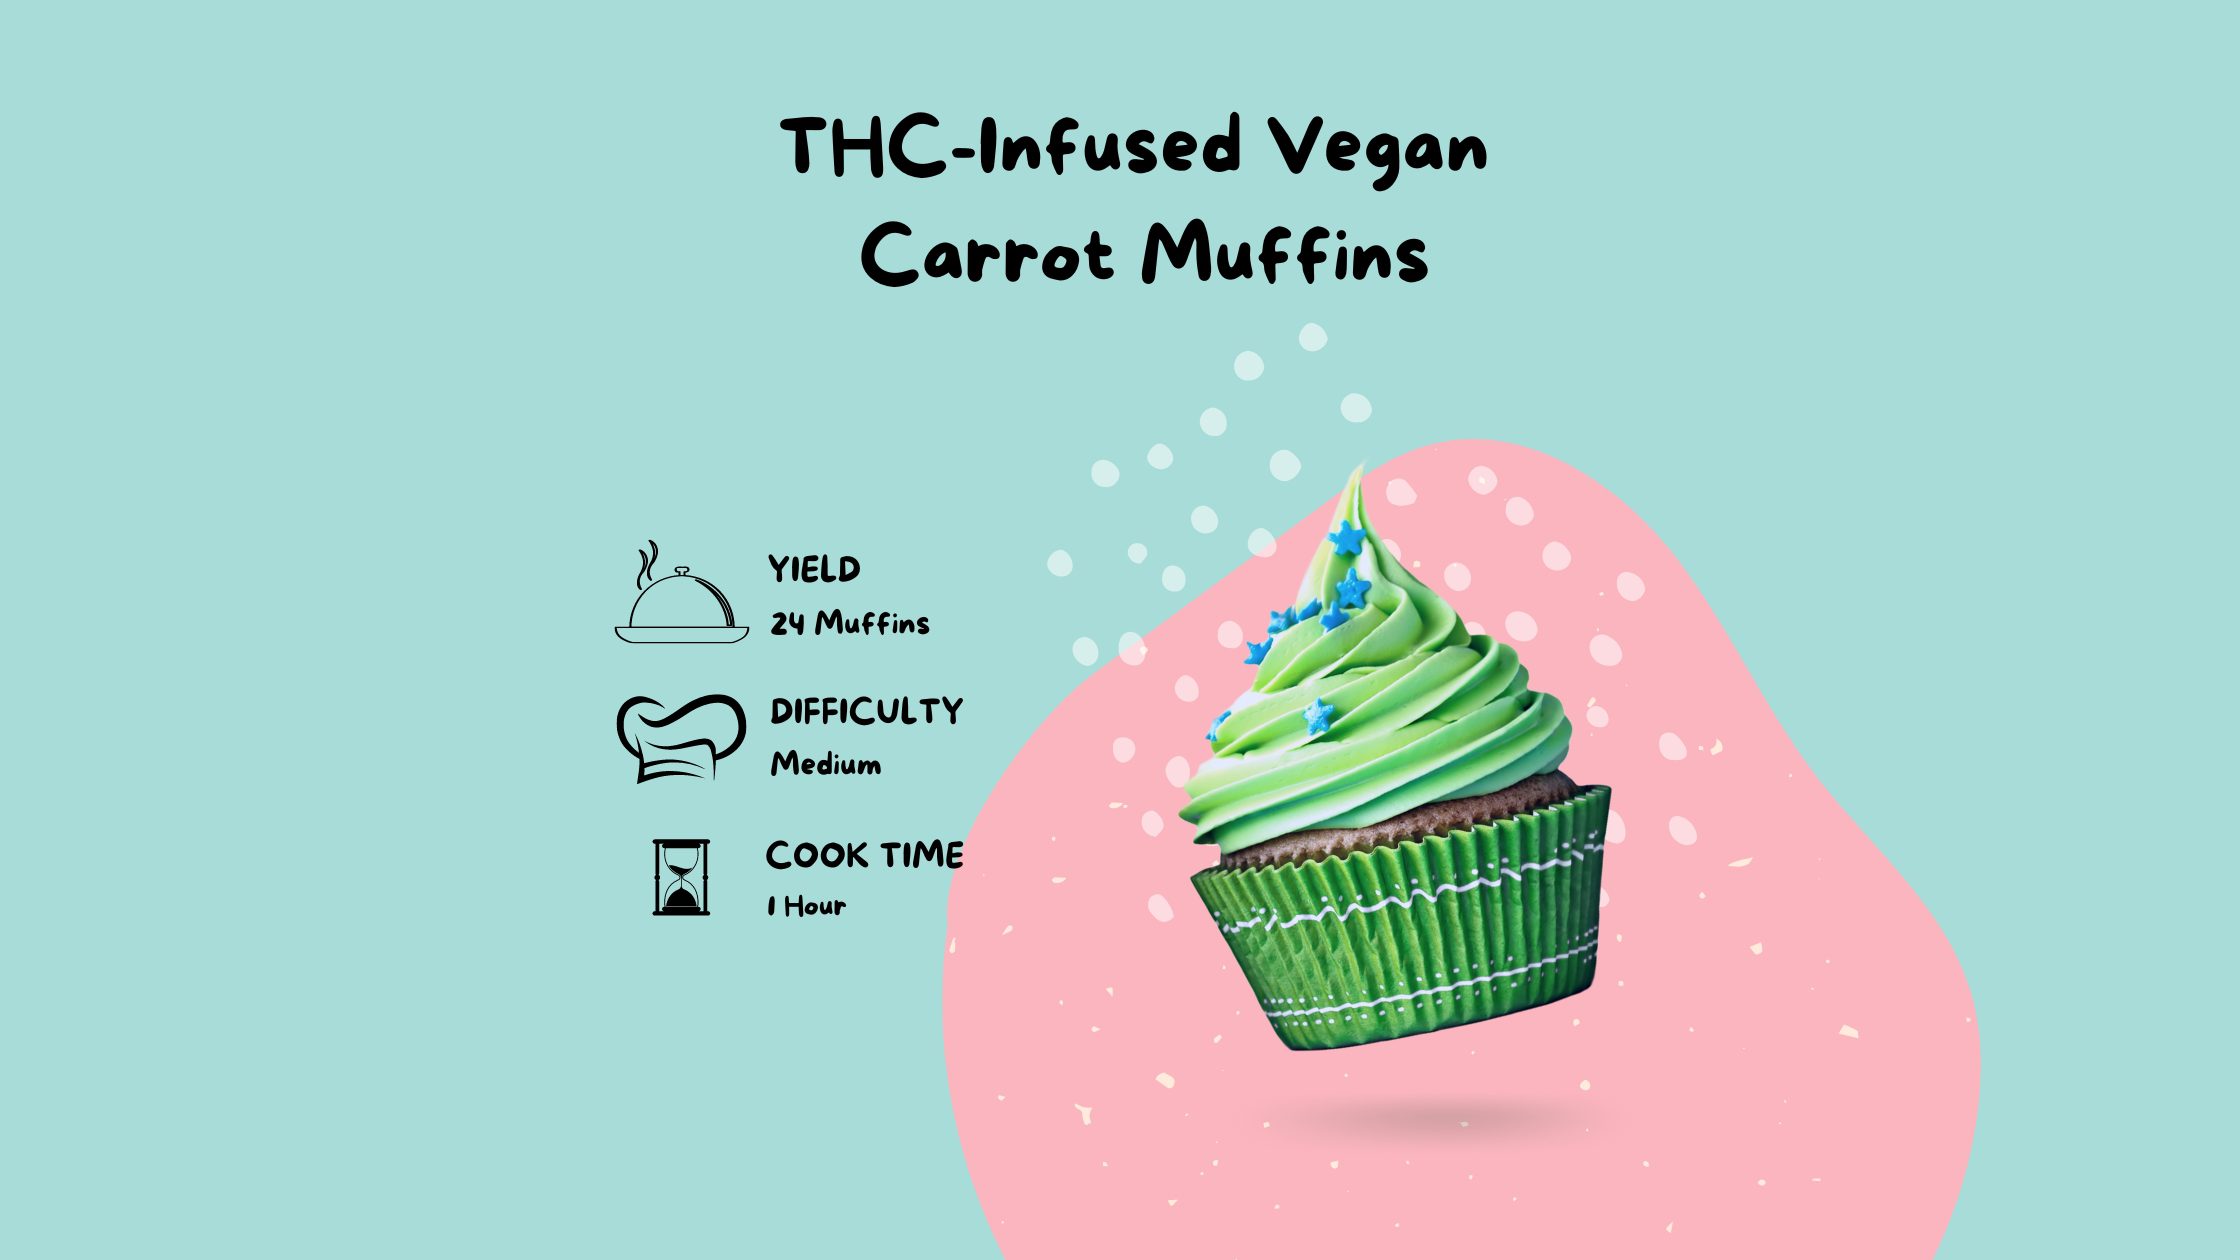 THC-Infused Vegan Carrot Muffins (2240 × 1260 px)